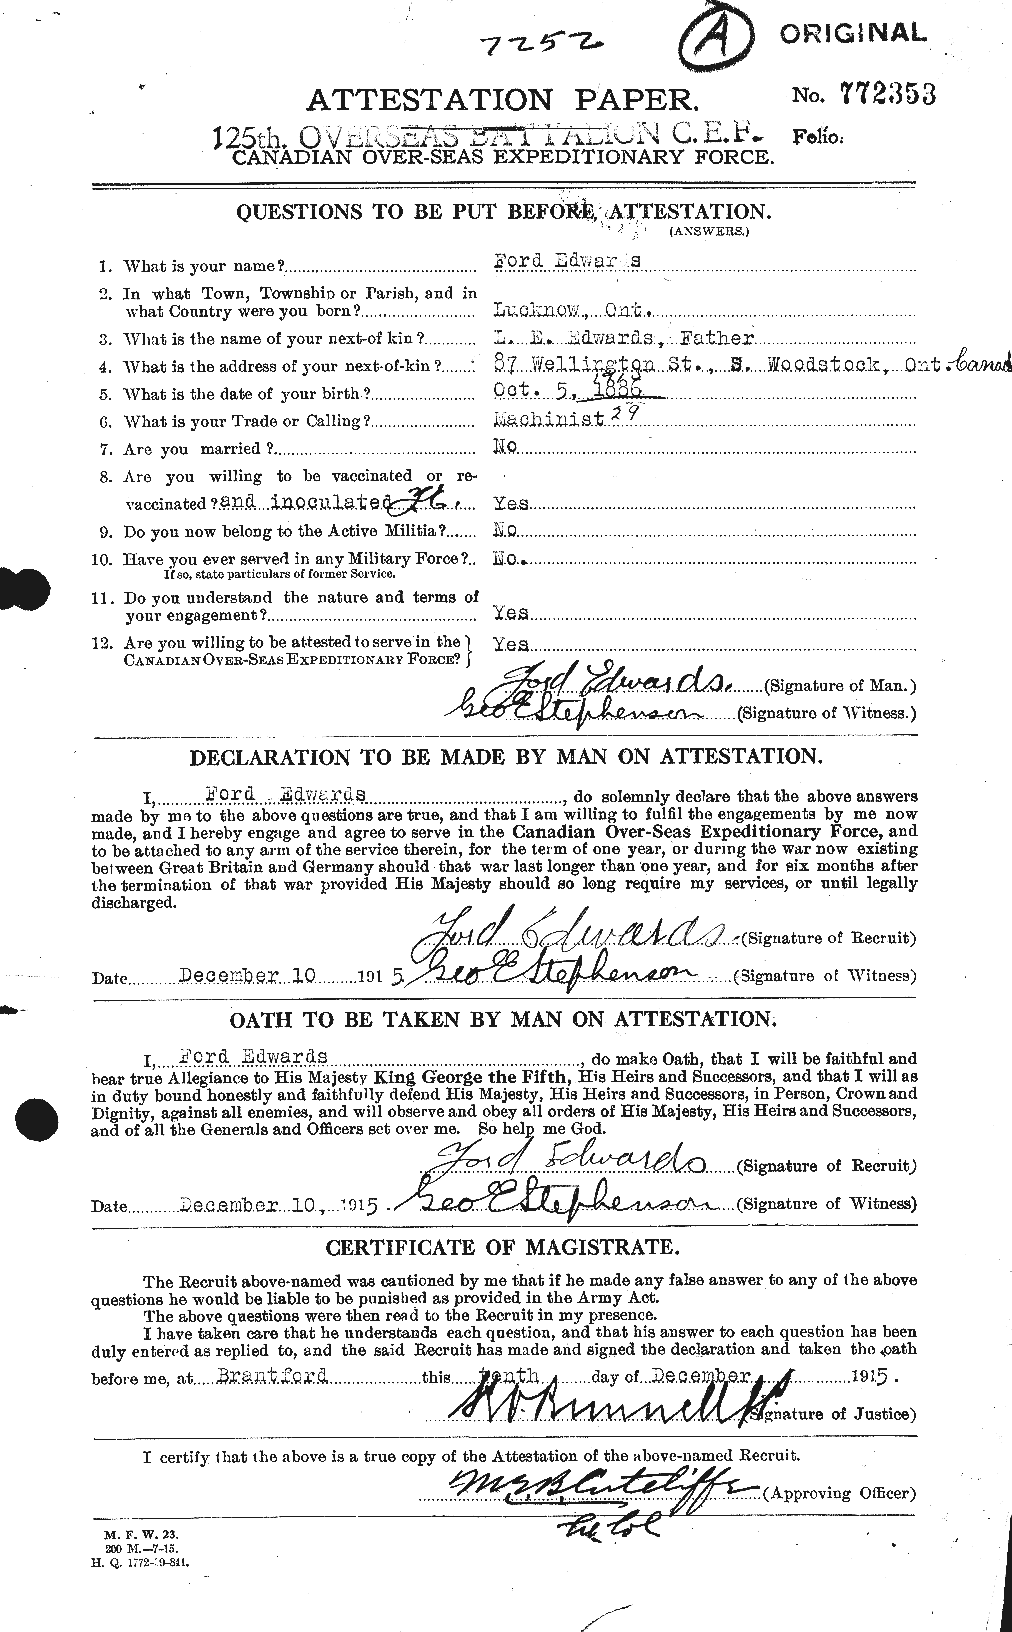 Personnel Records of the First World War - CEF 309031a